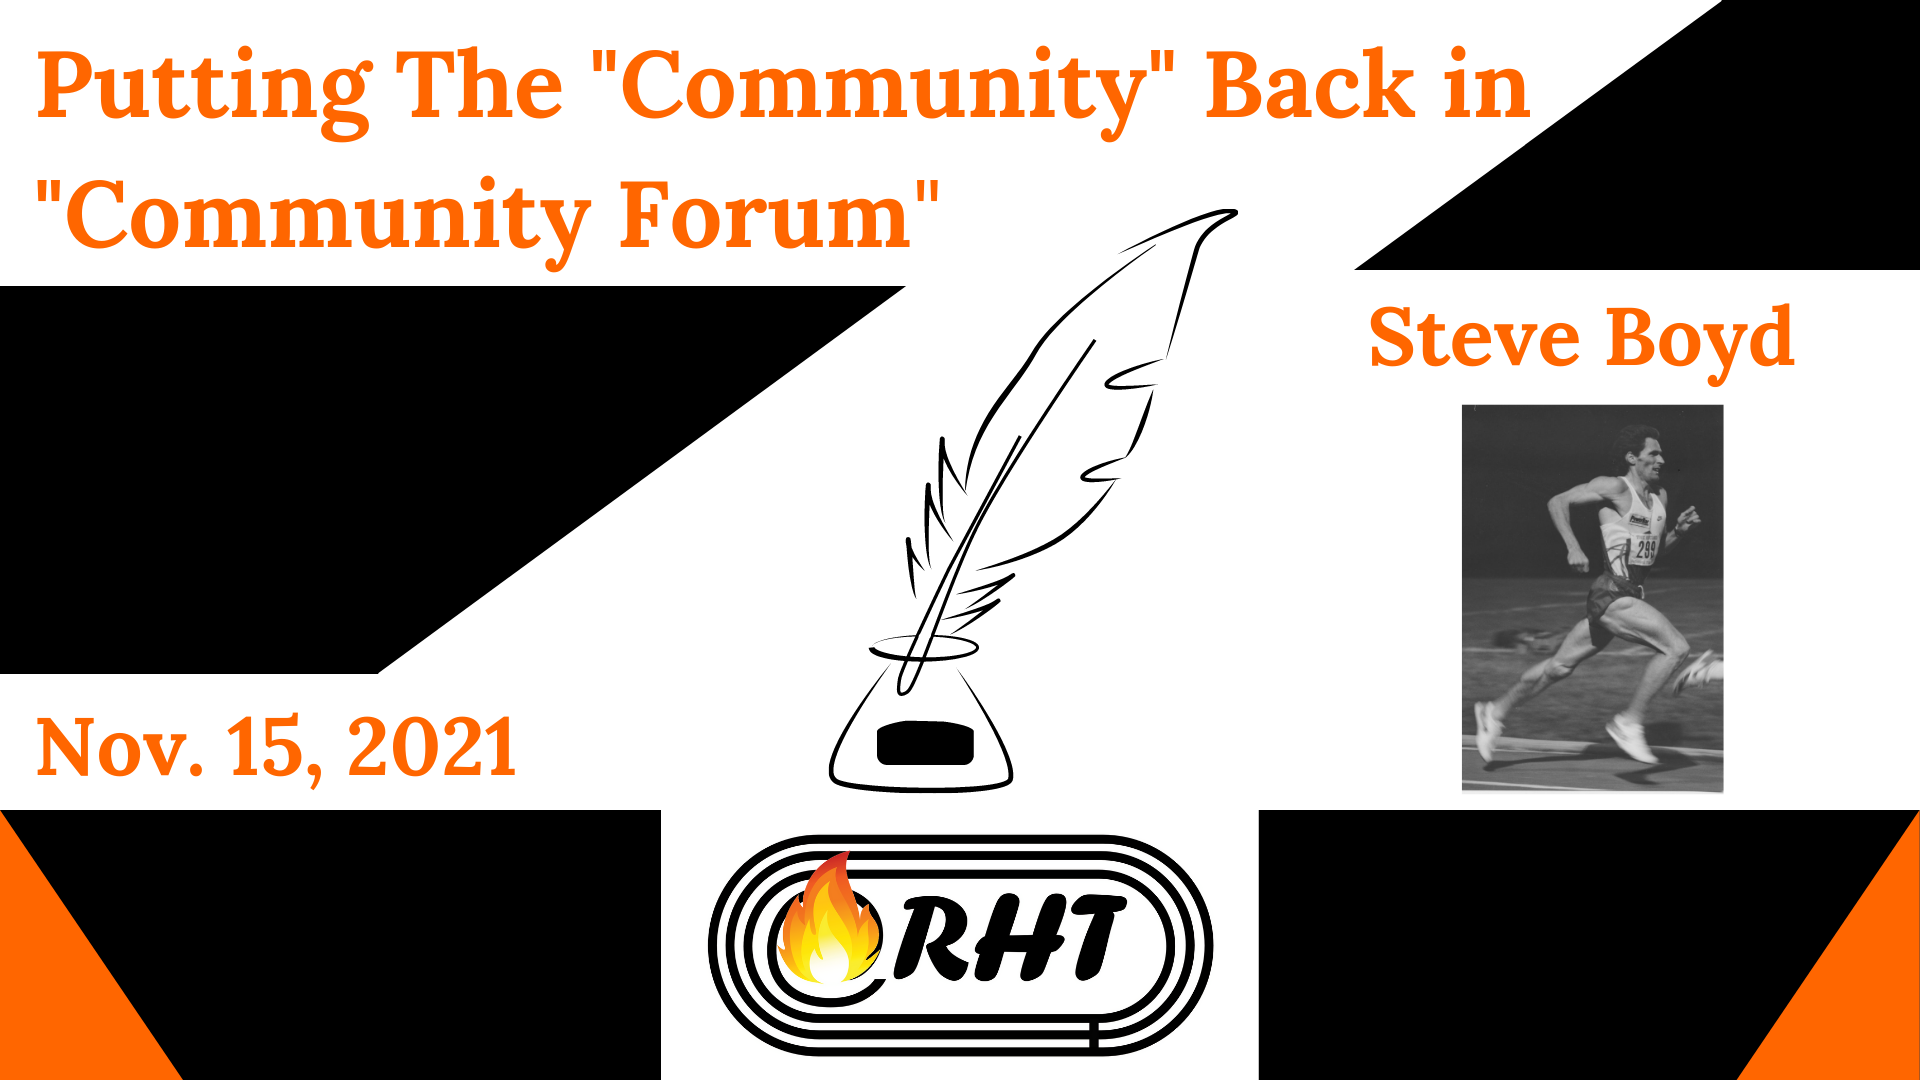 Title: Putting the "Community" Back in "Community Forum." Date: November 15, 2021. Author: Steve Boyd. Graphic: Quill on top of the running hot takes logo.